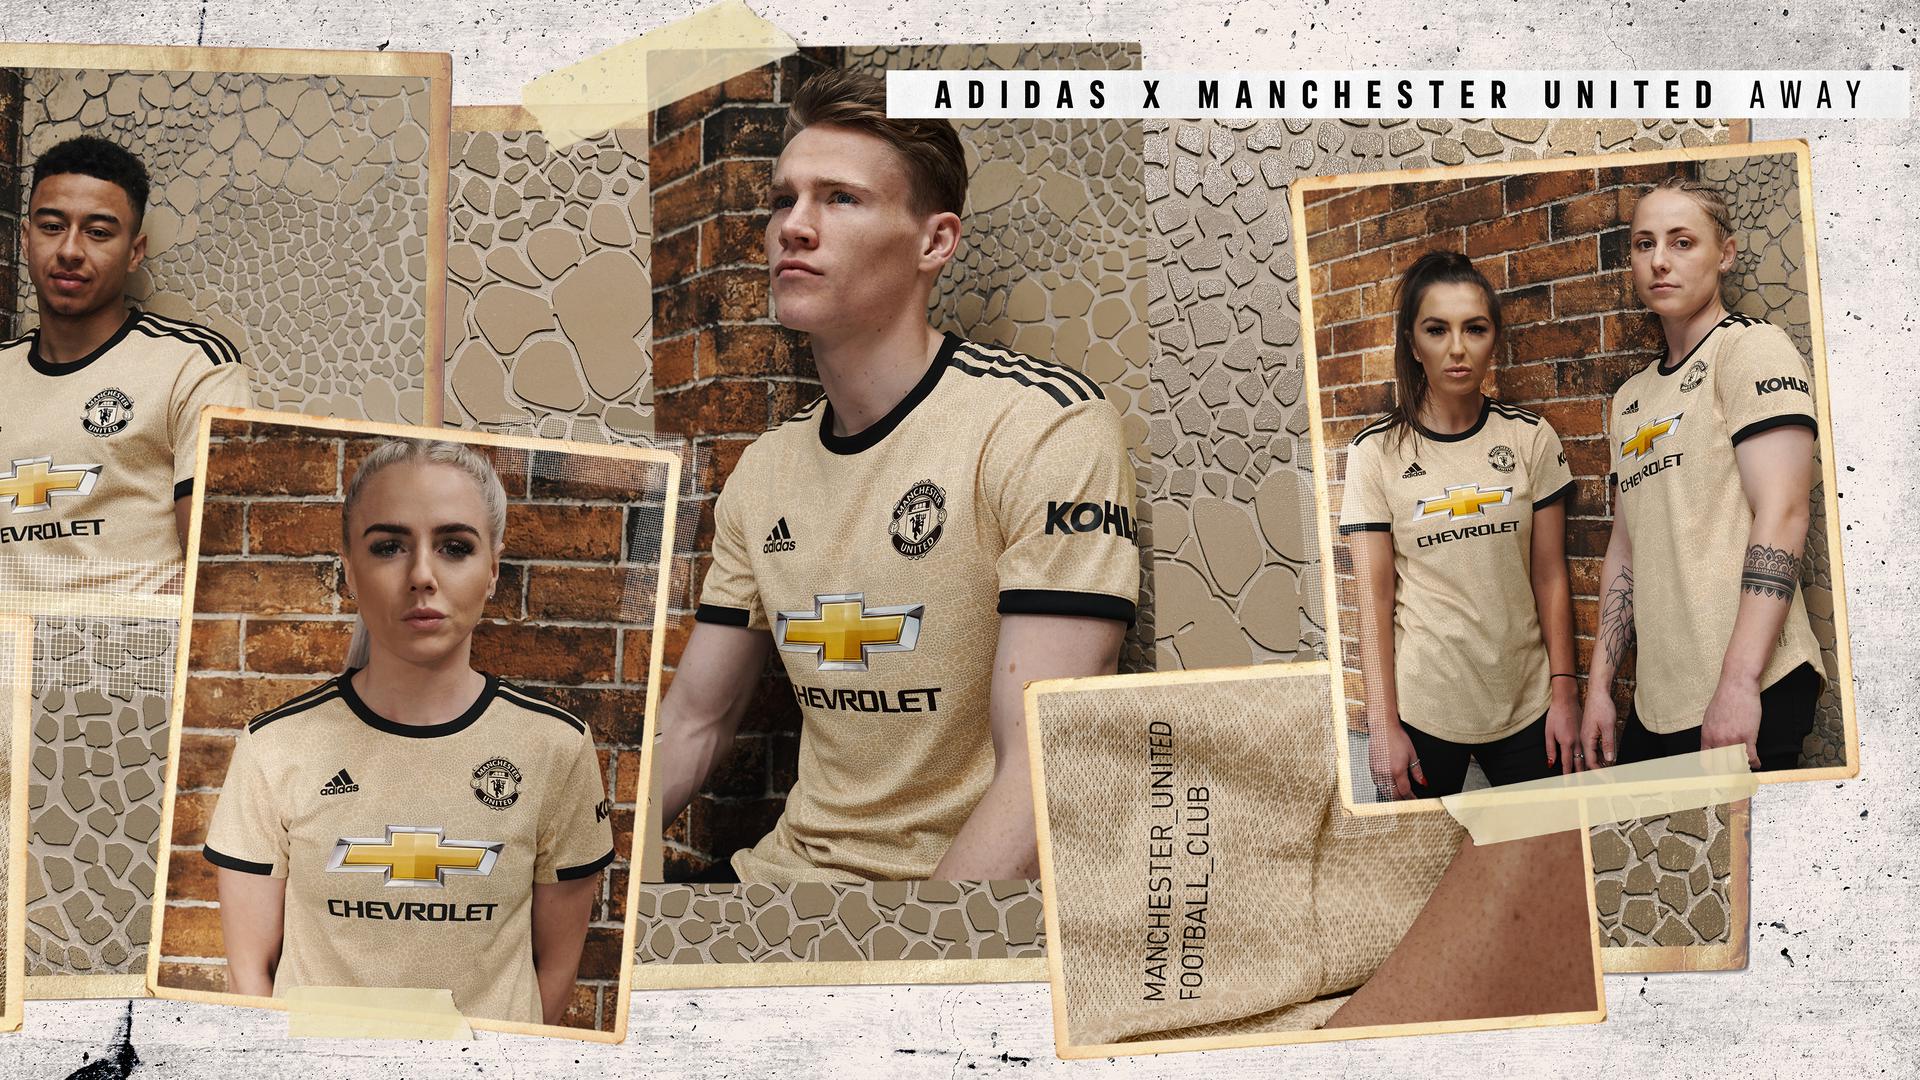 Man Utd and adidas release new away kit for 2019/20 | Manchester ...